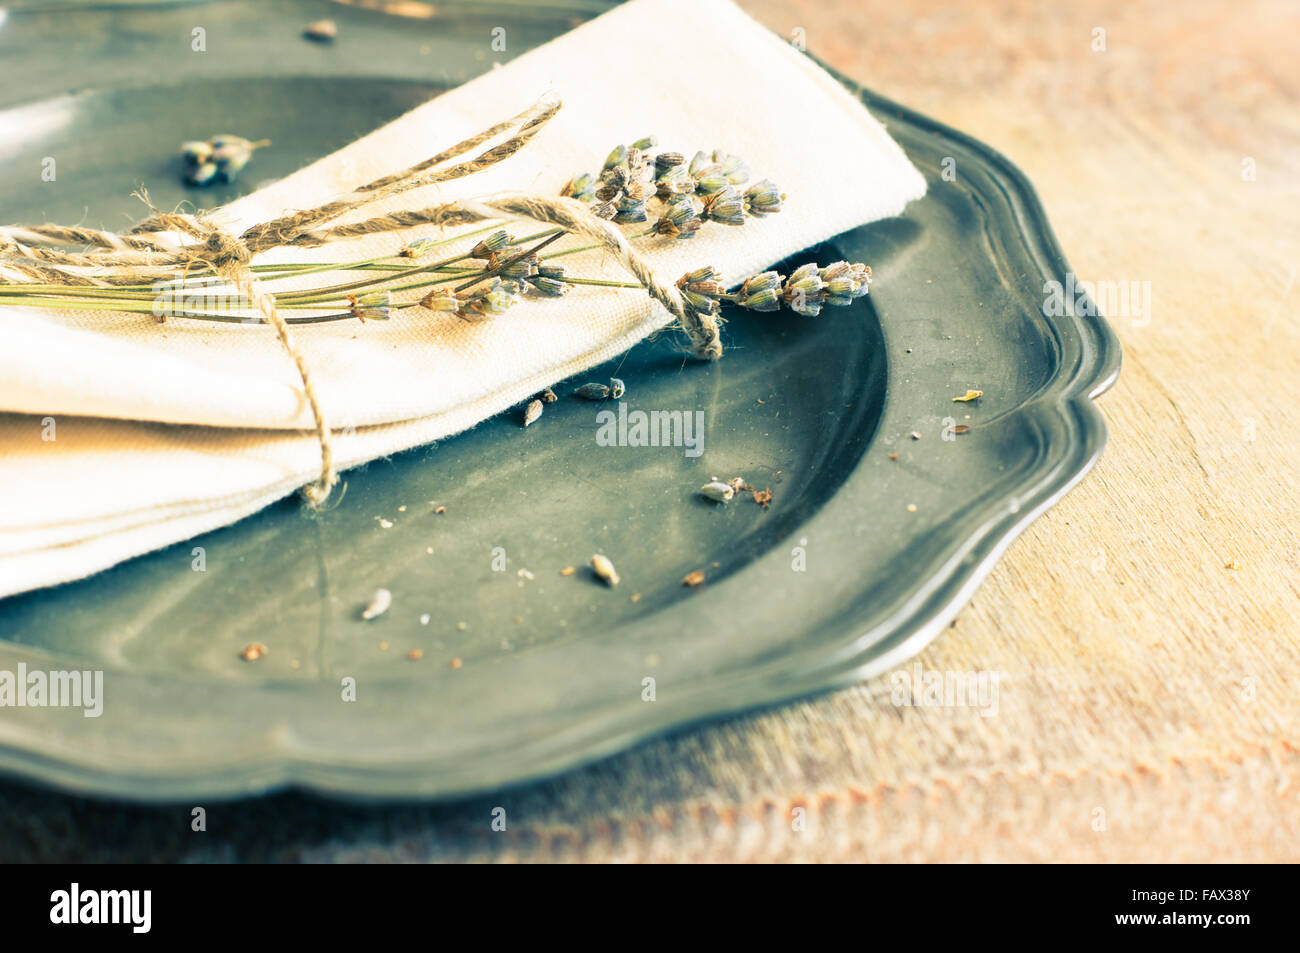 Rustic table setting with vintage silverware and plate with dried lavender flowers. Toned image Stock Photo